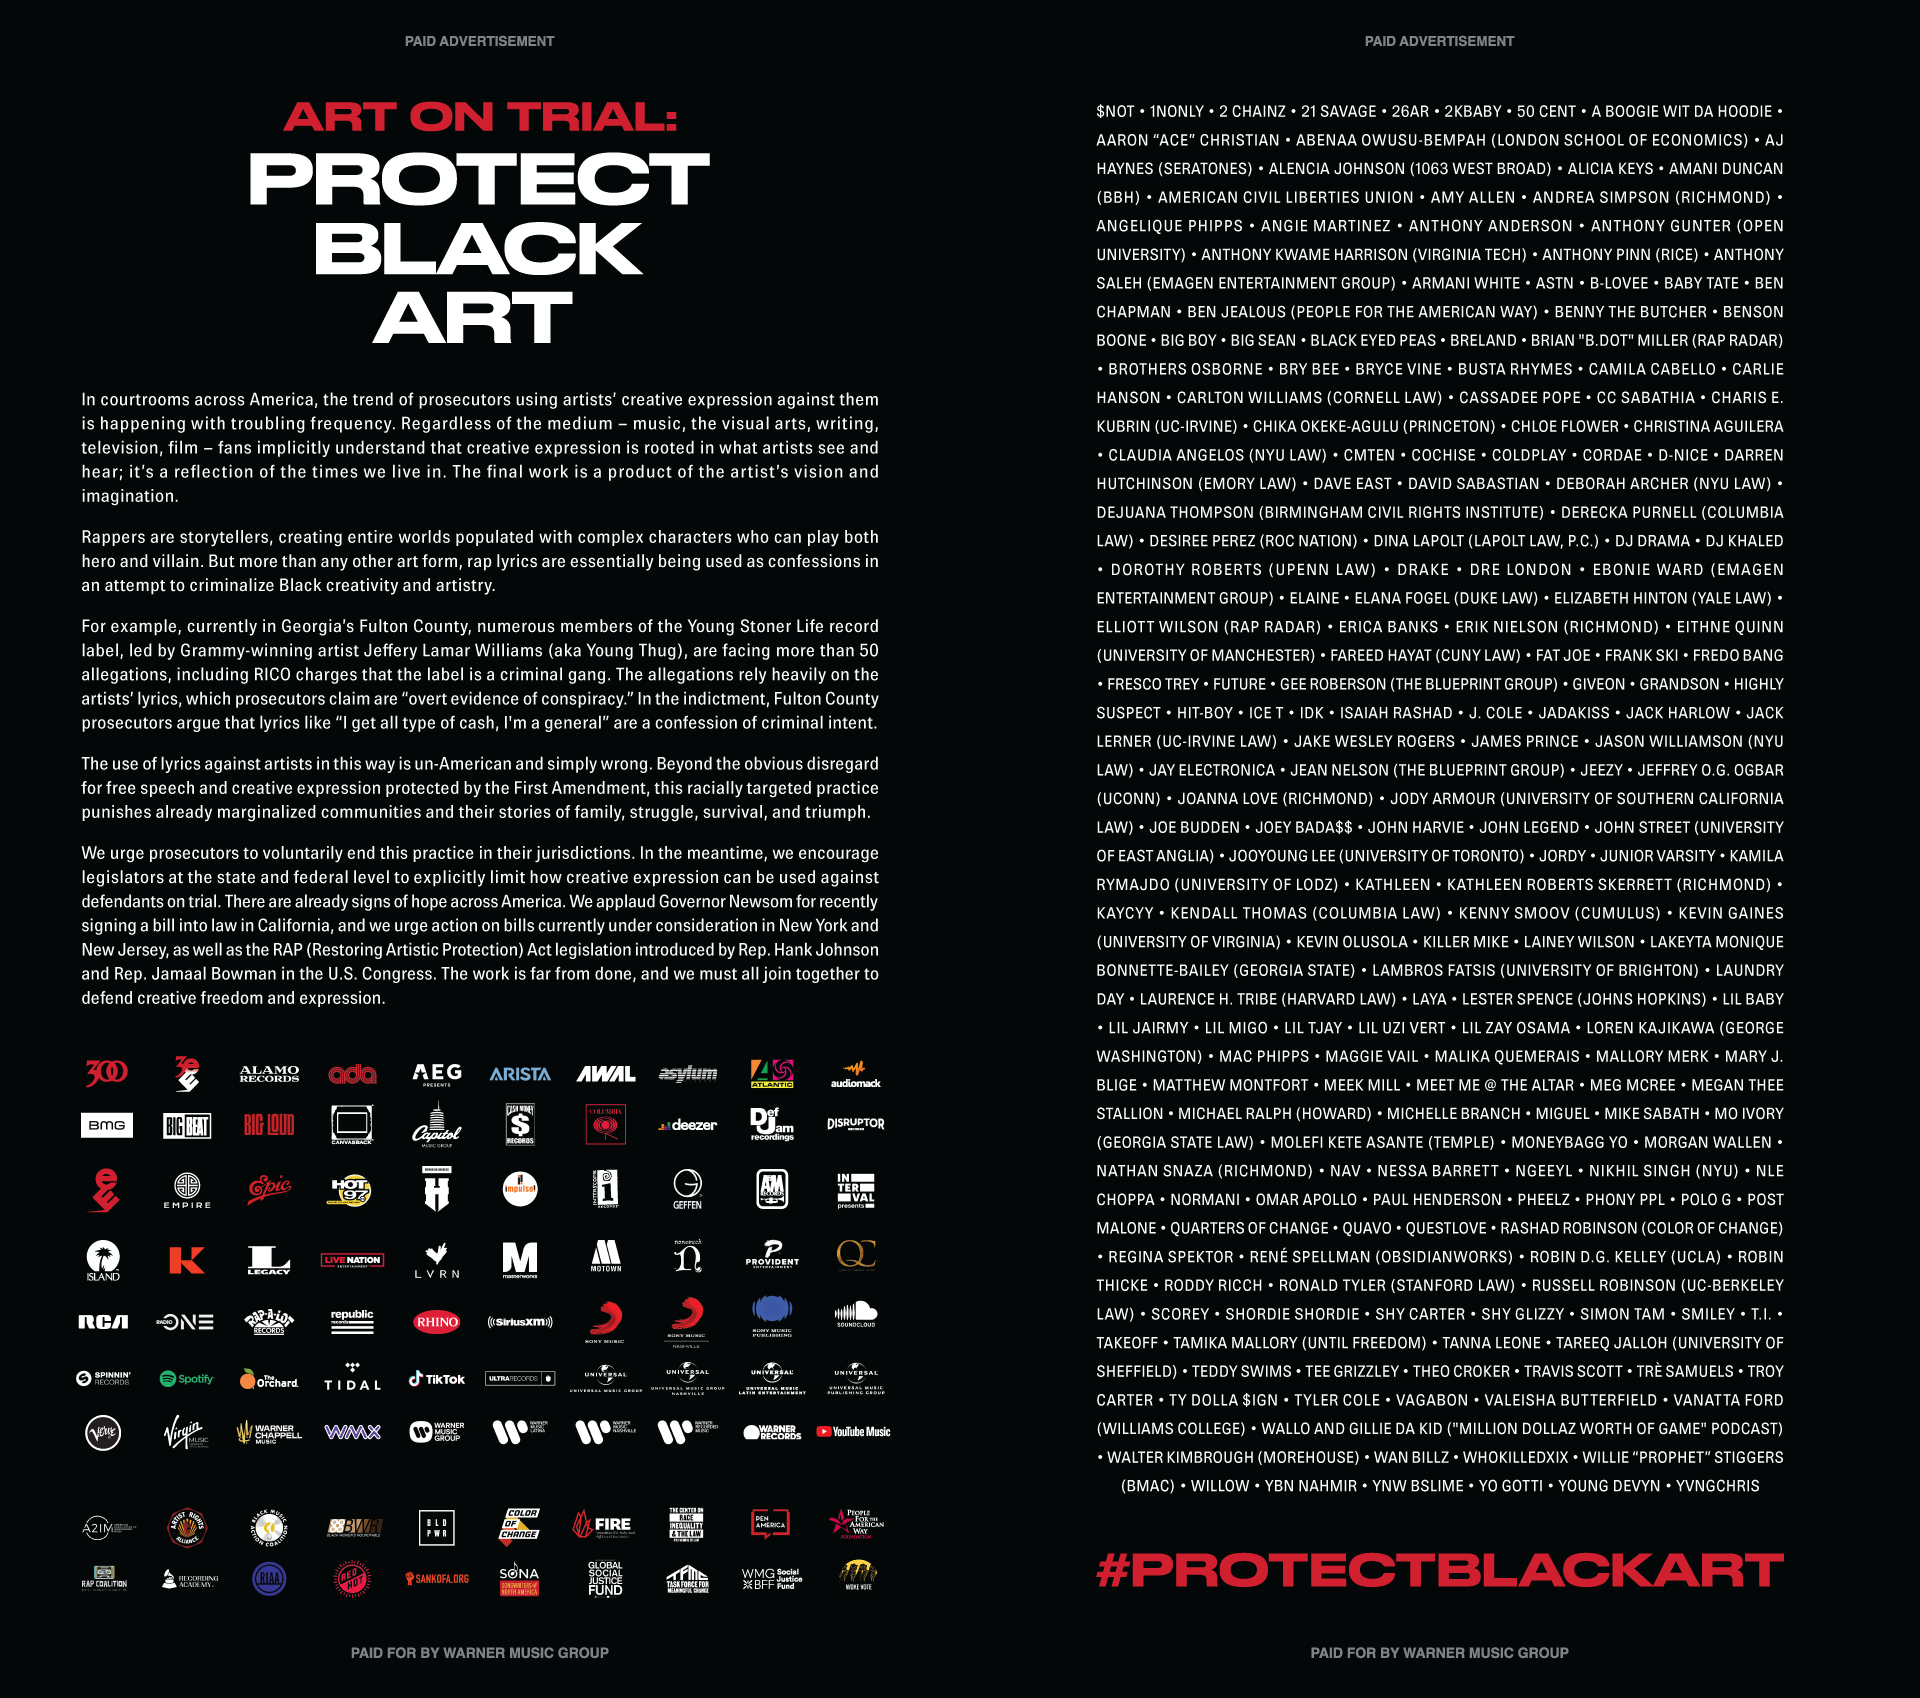 Protect Black Art in the New York Times